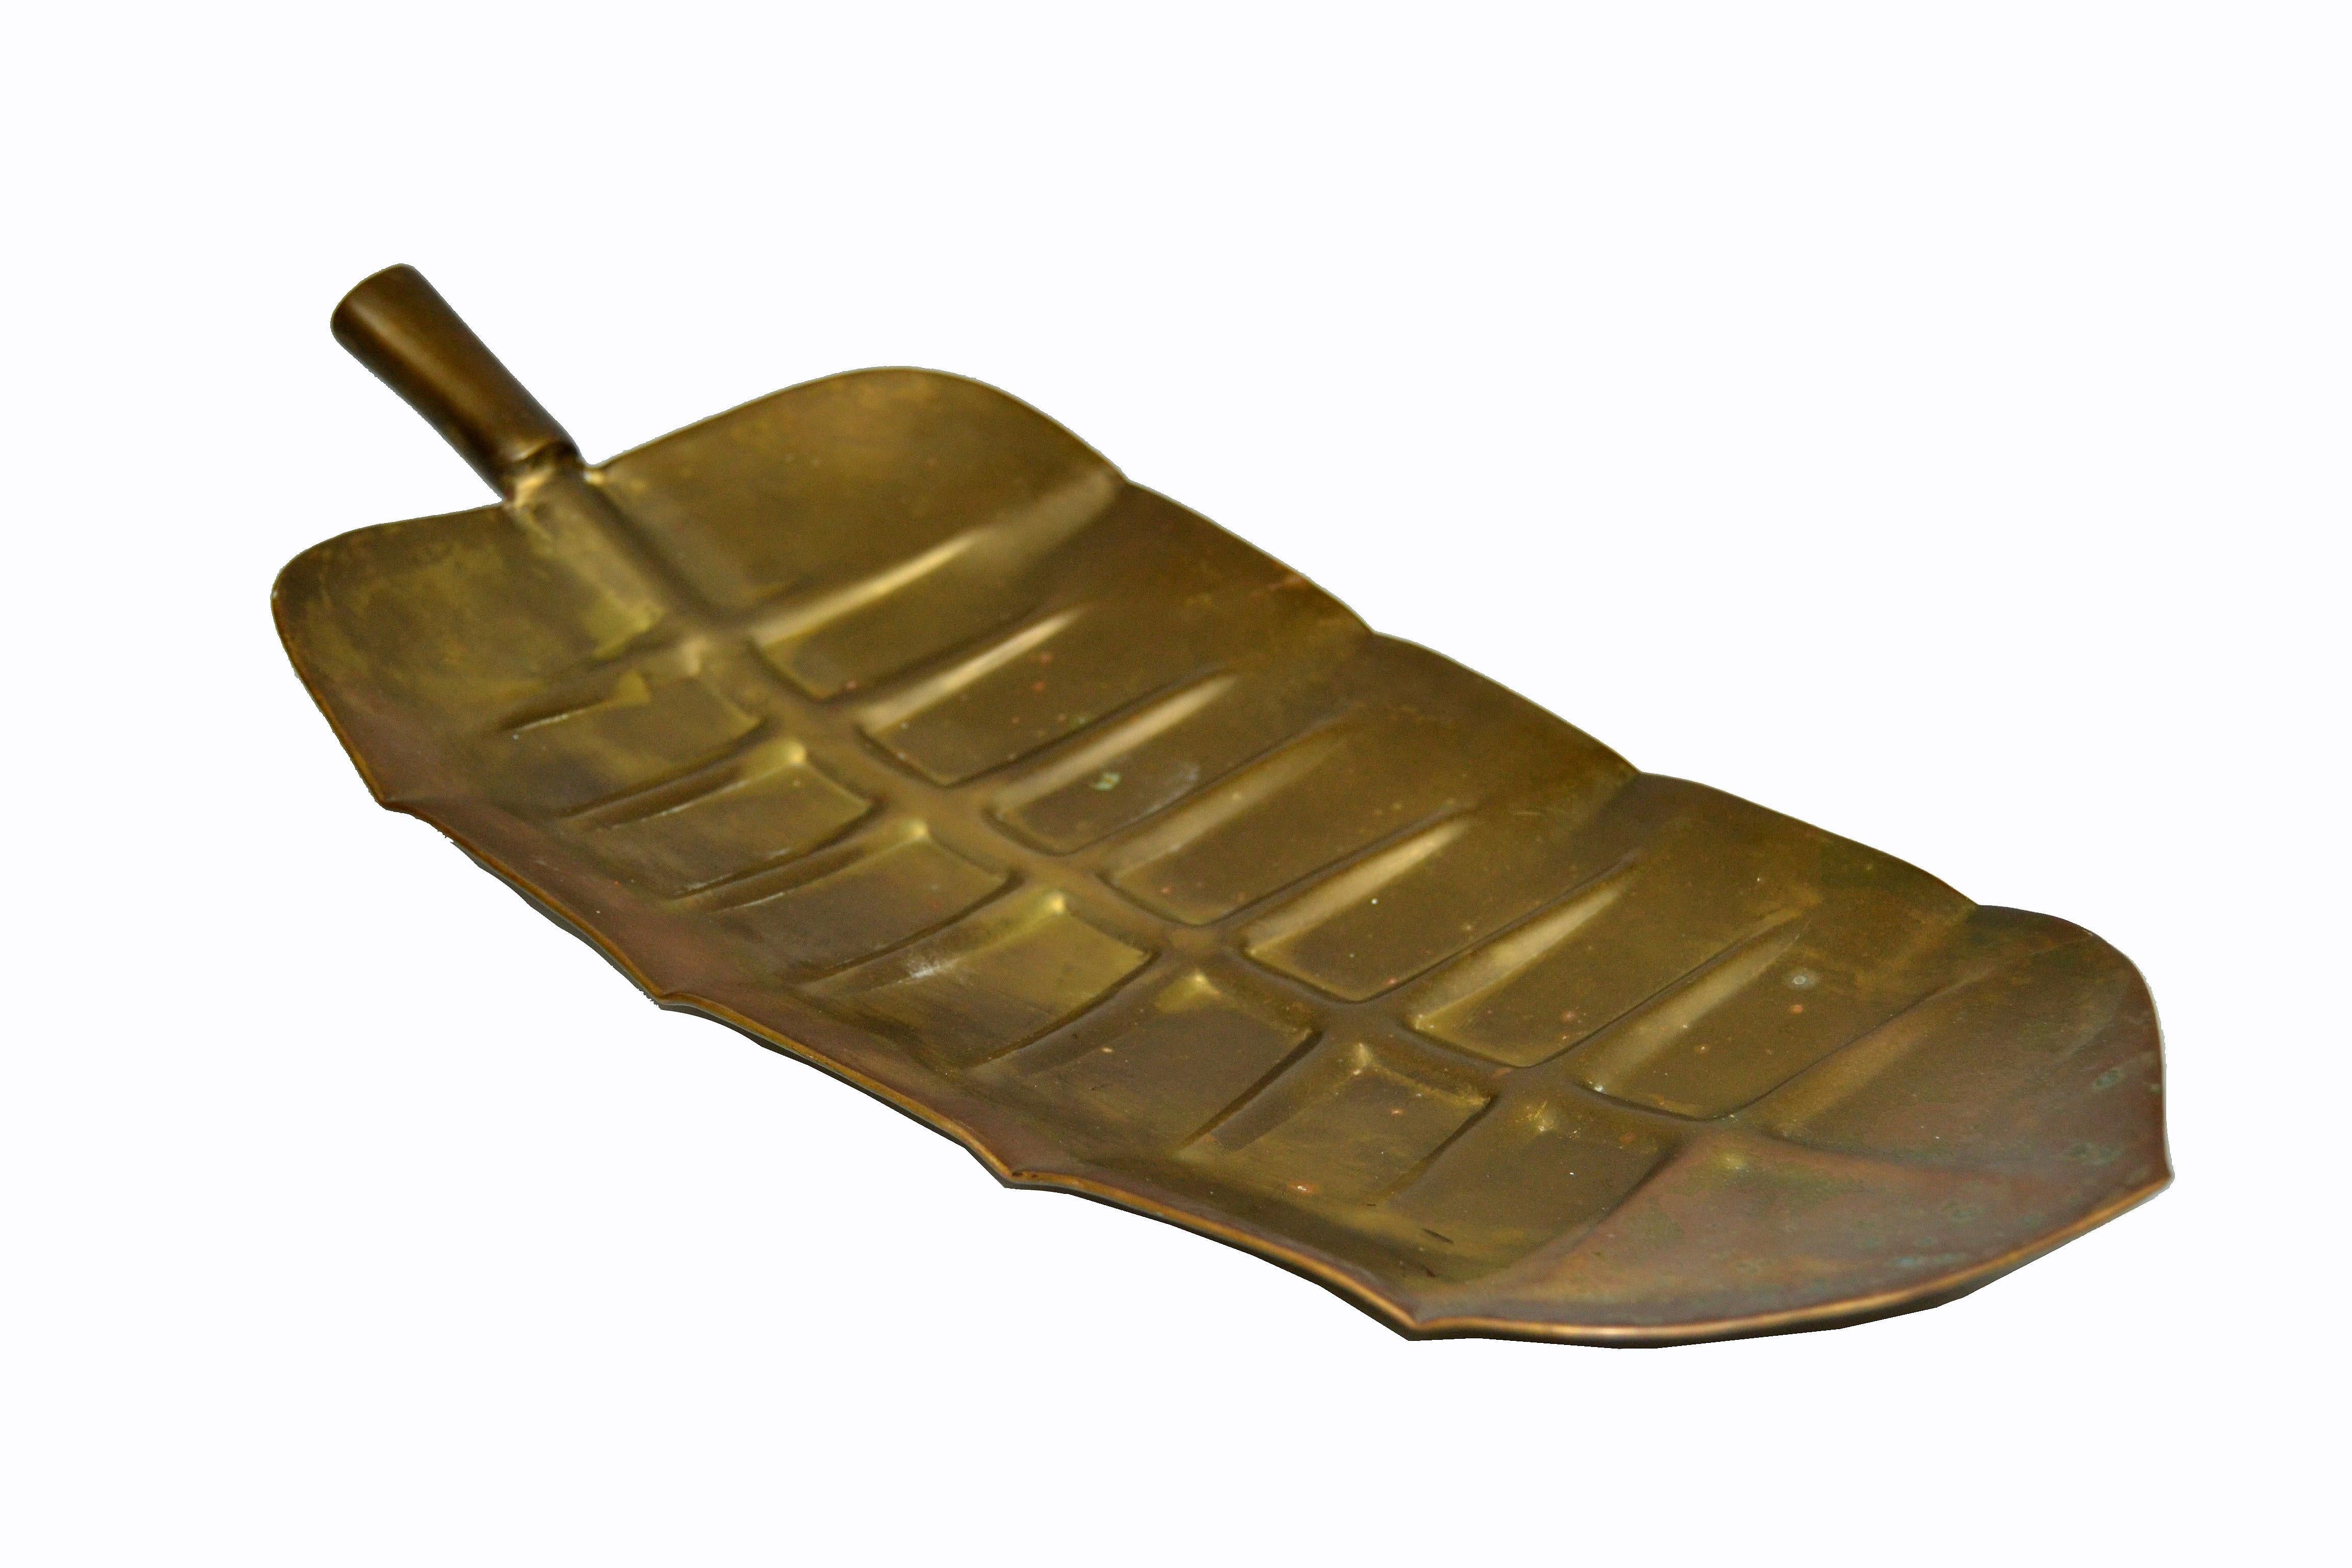 Mid-Century Modern tree leaf shaped footed bowl in brass.
Great for Your coffee table display or as a centerpiece.